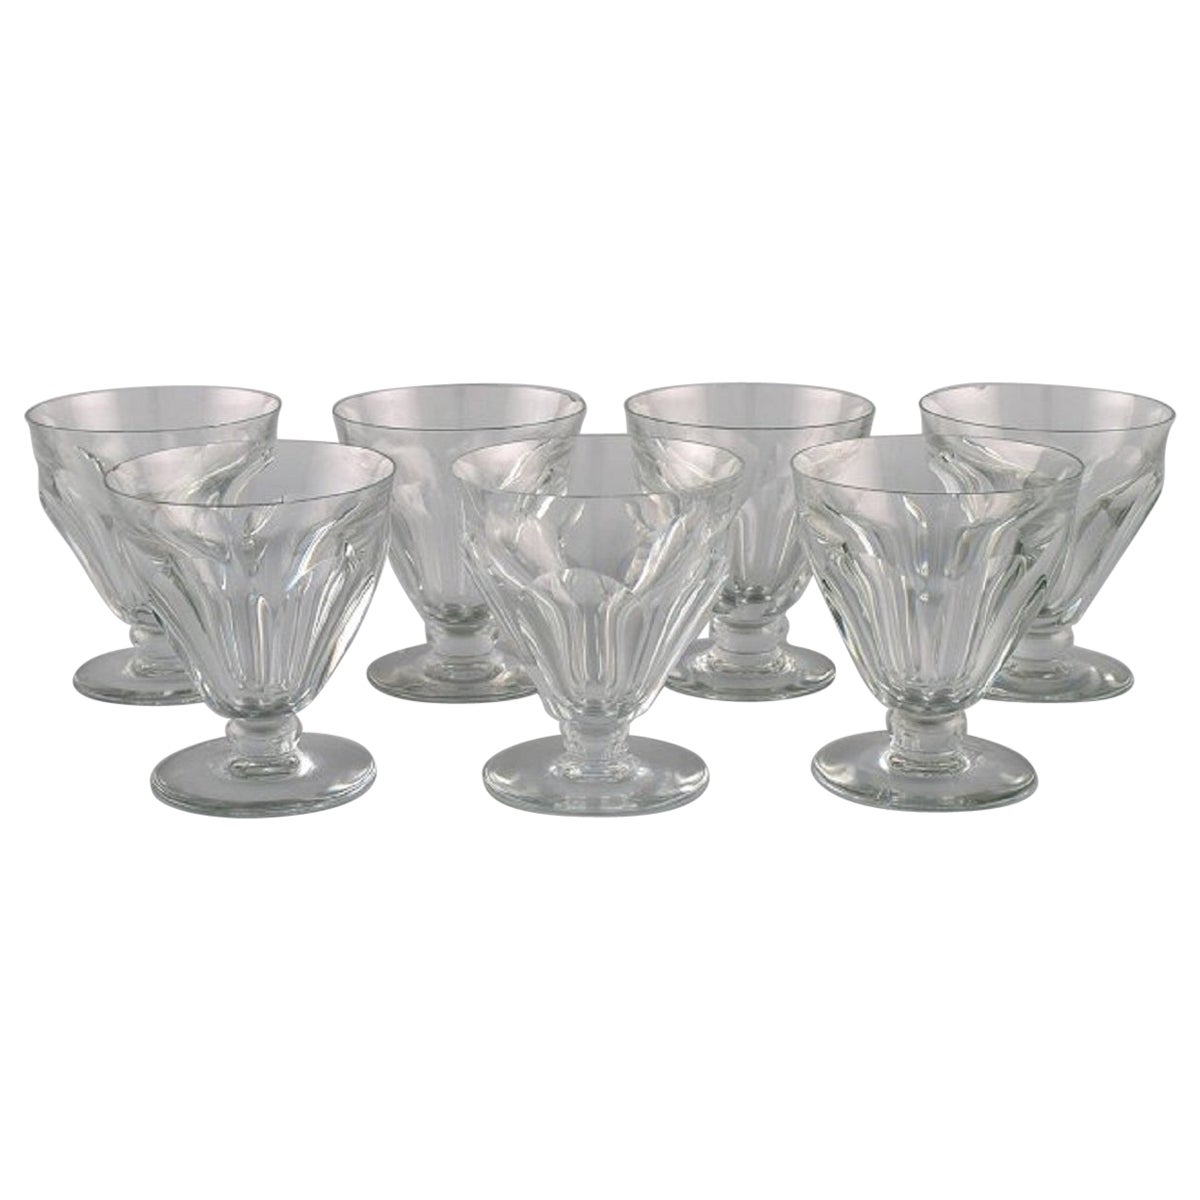 Baccarat, France, Seven Tallyrand Glasses in Clear Mouth-Blown Crystal Glass